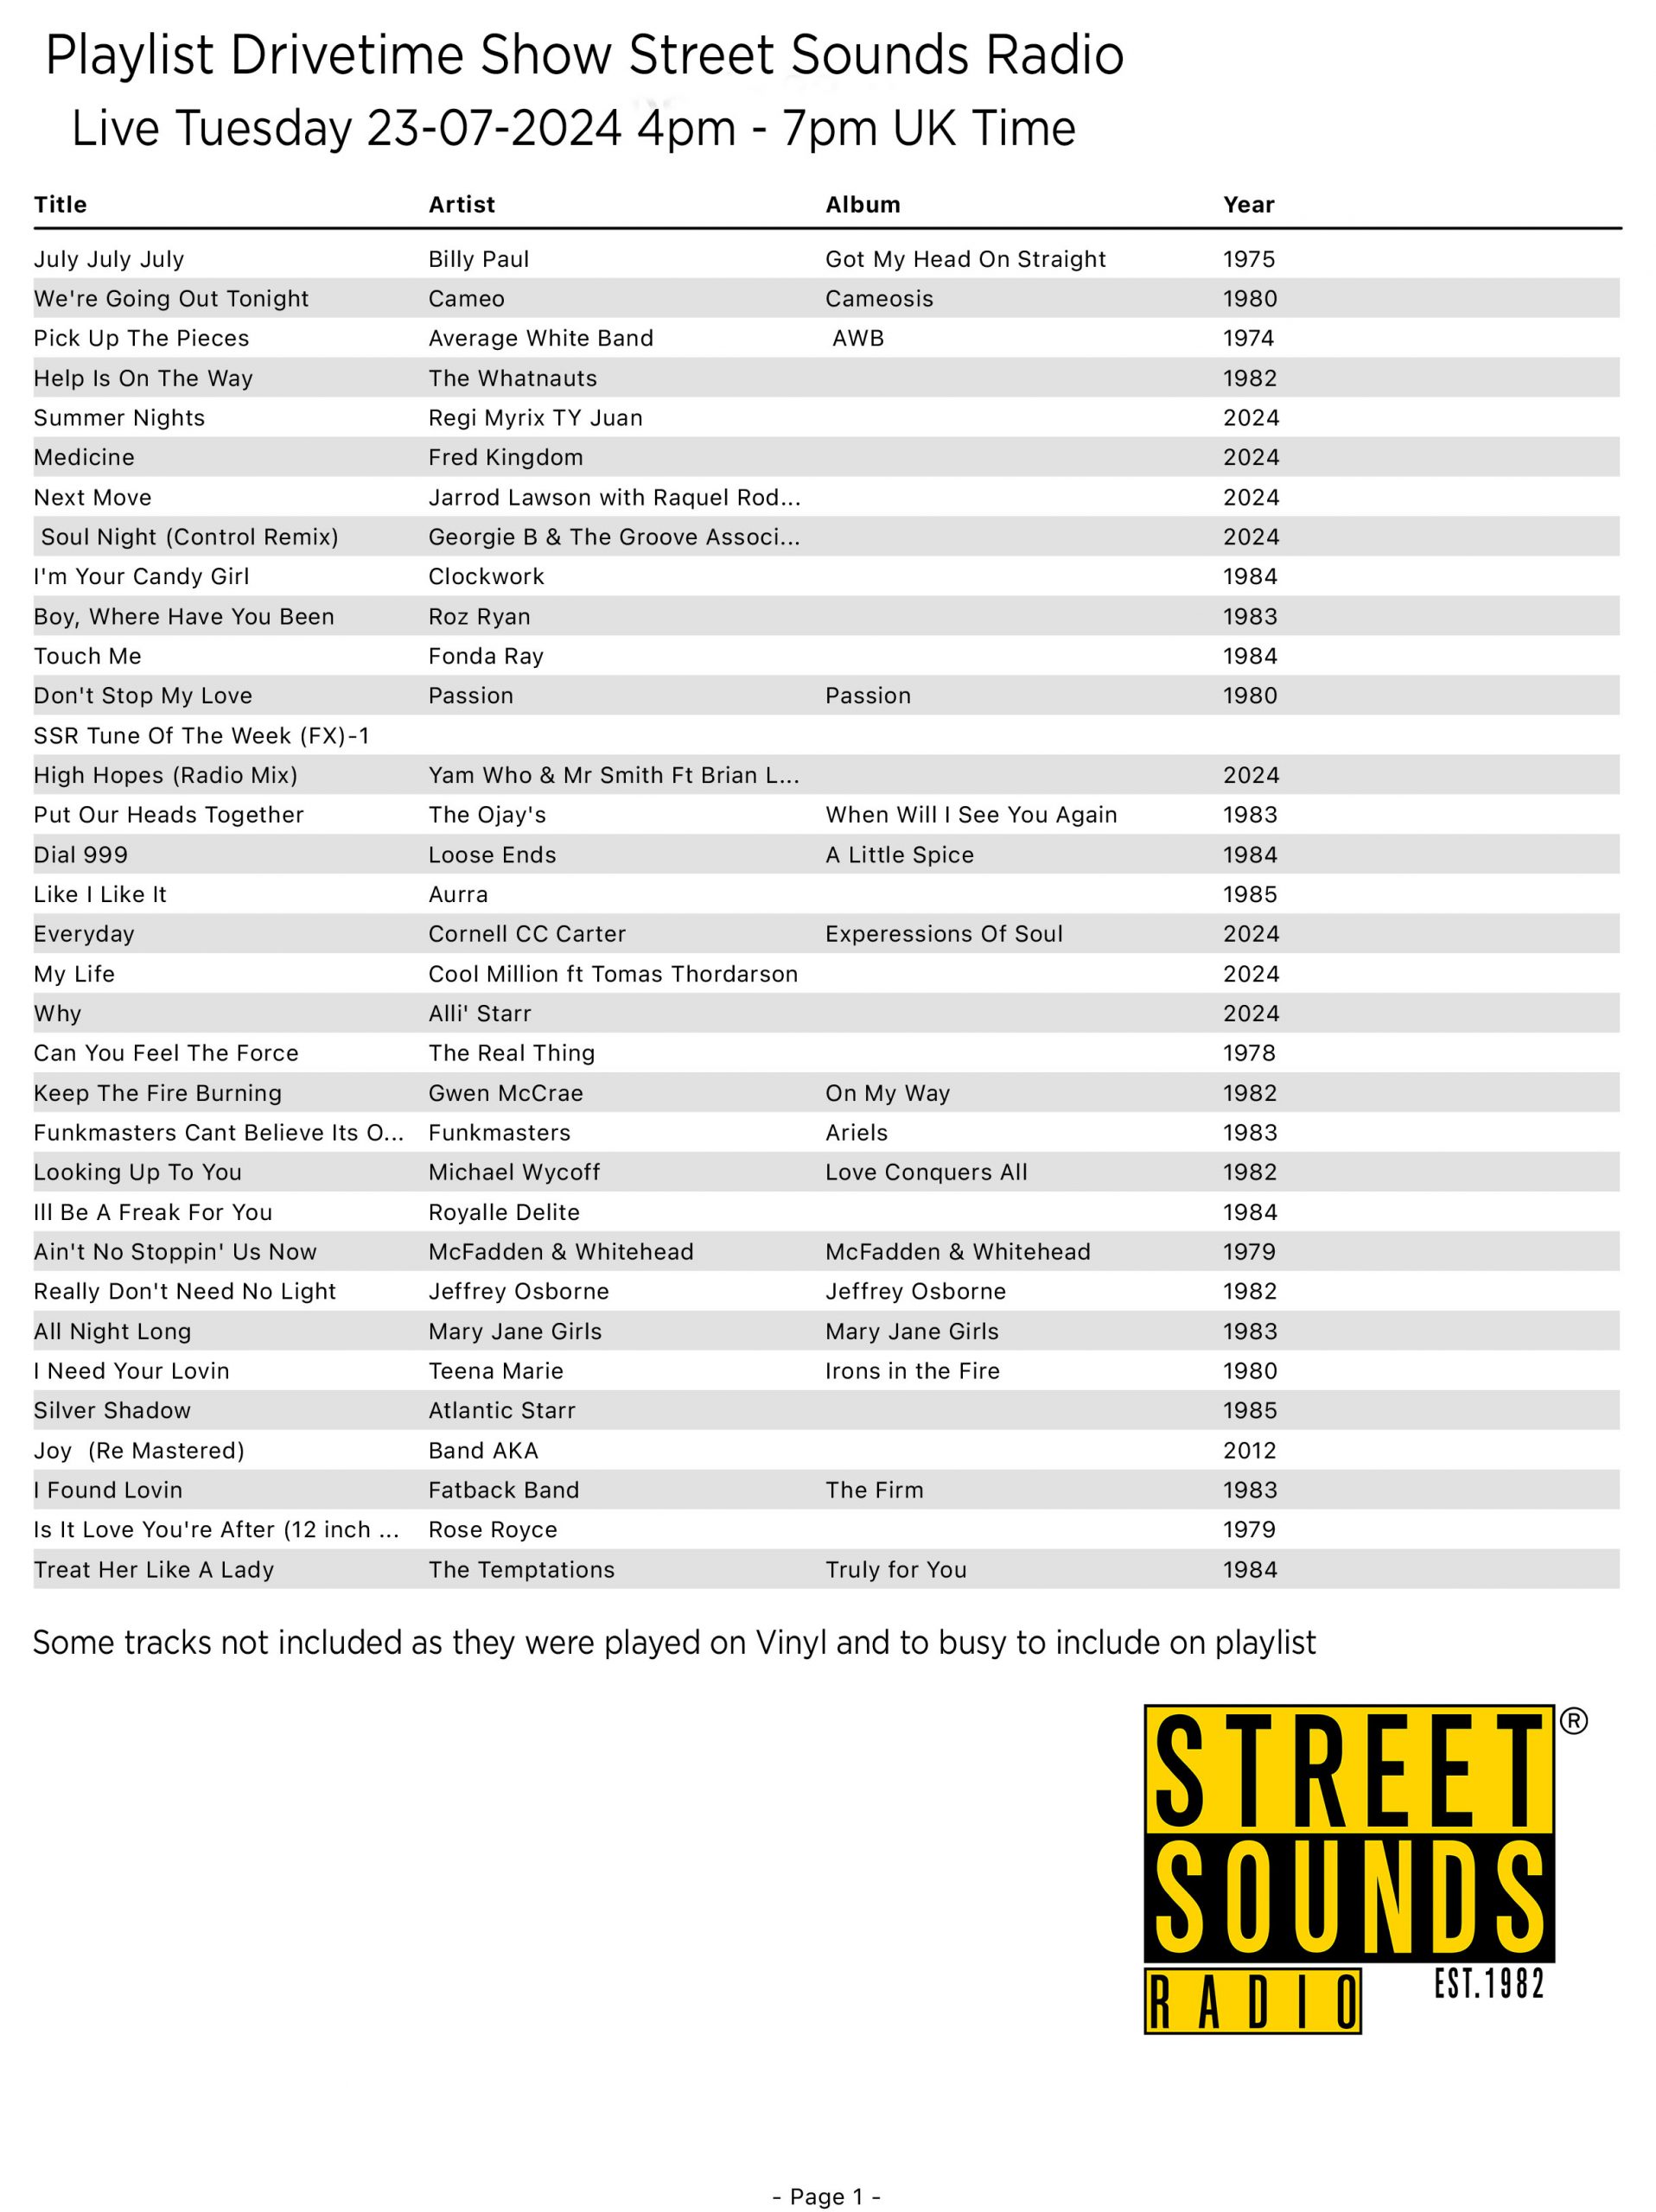 Playlist Drivetime show 4pm-7pm Tuesday 23-07-2024 On Street Sounds Radio whith Chris Stewart